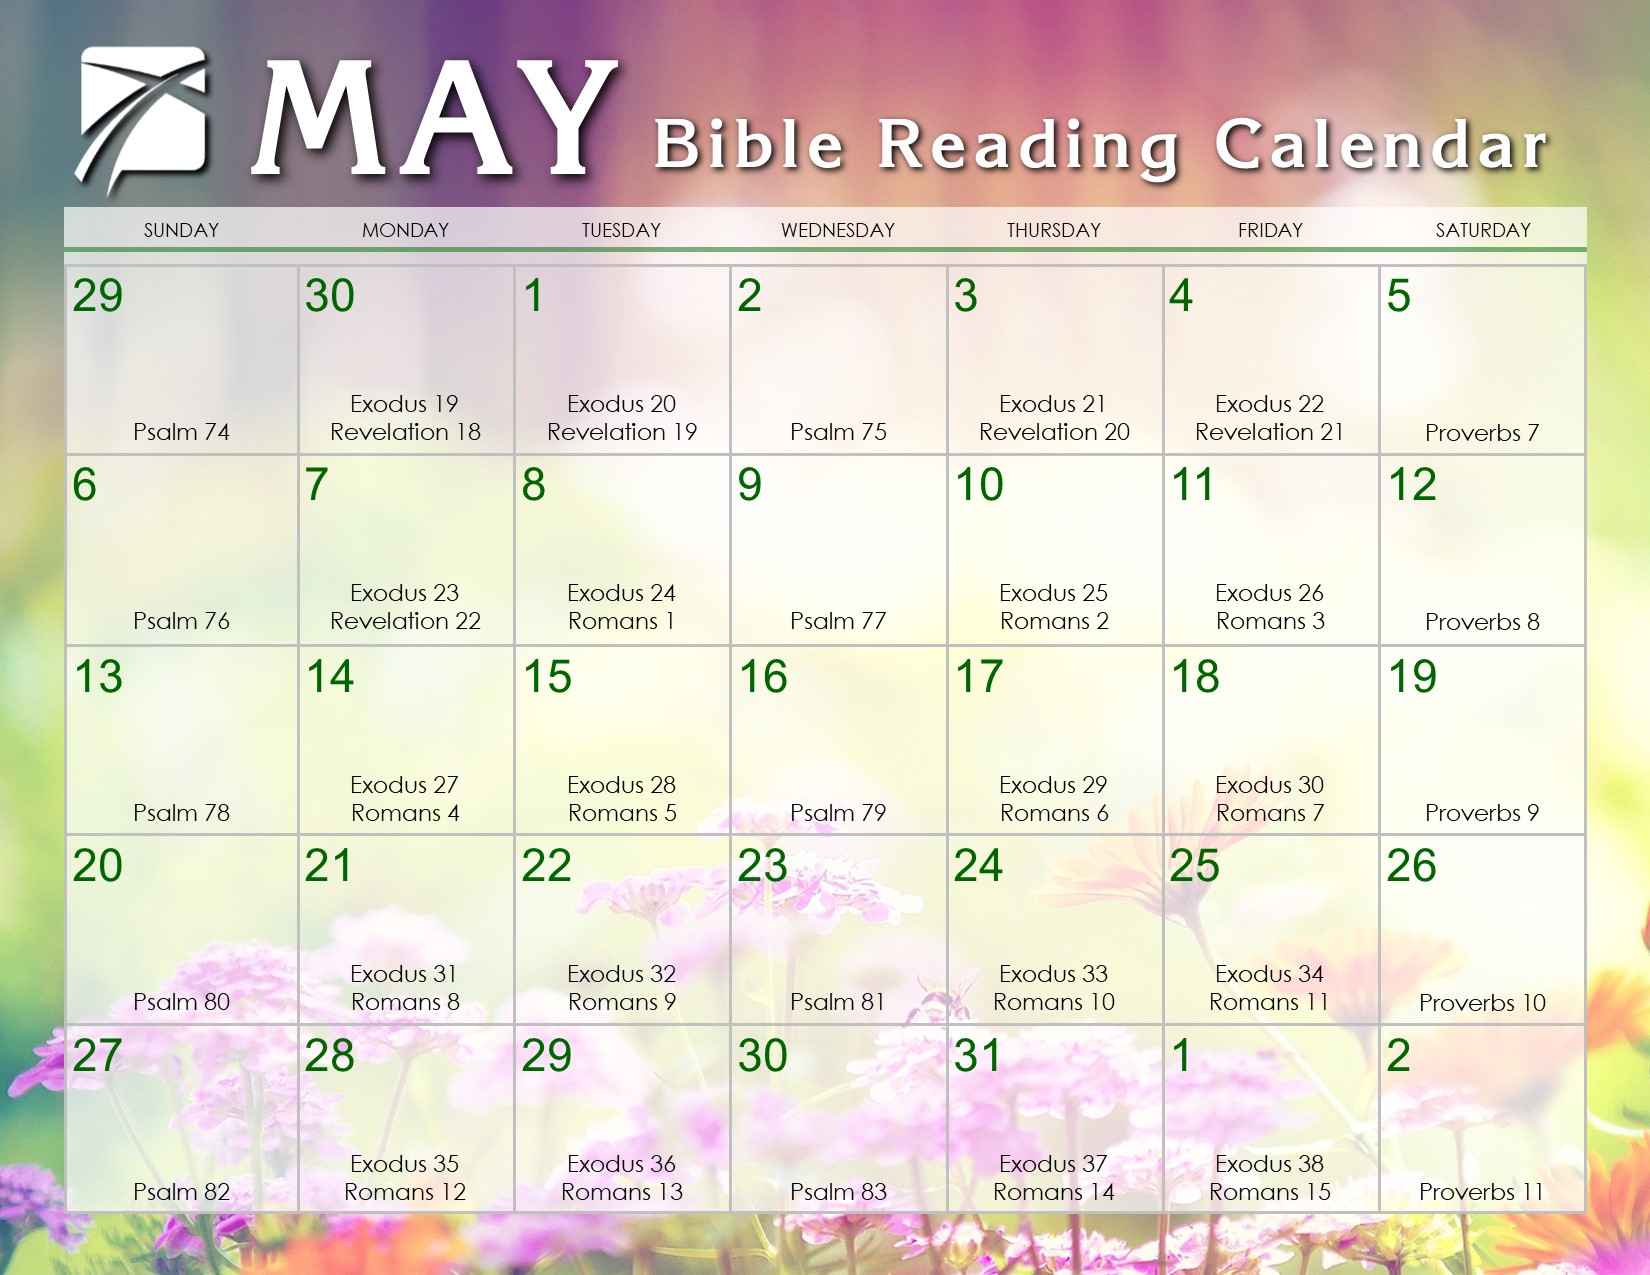 May 2018 Daily Bible Reading Calendar In God s Image